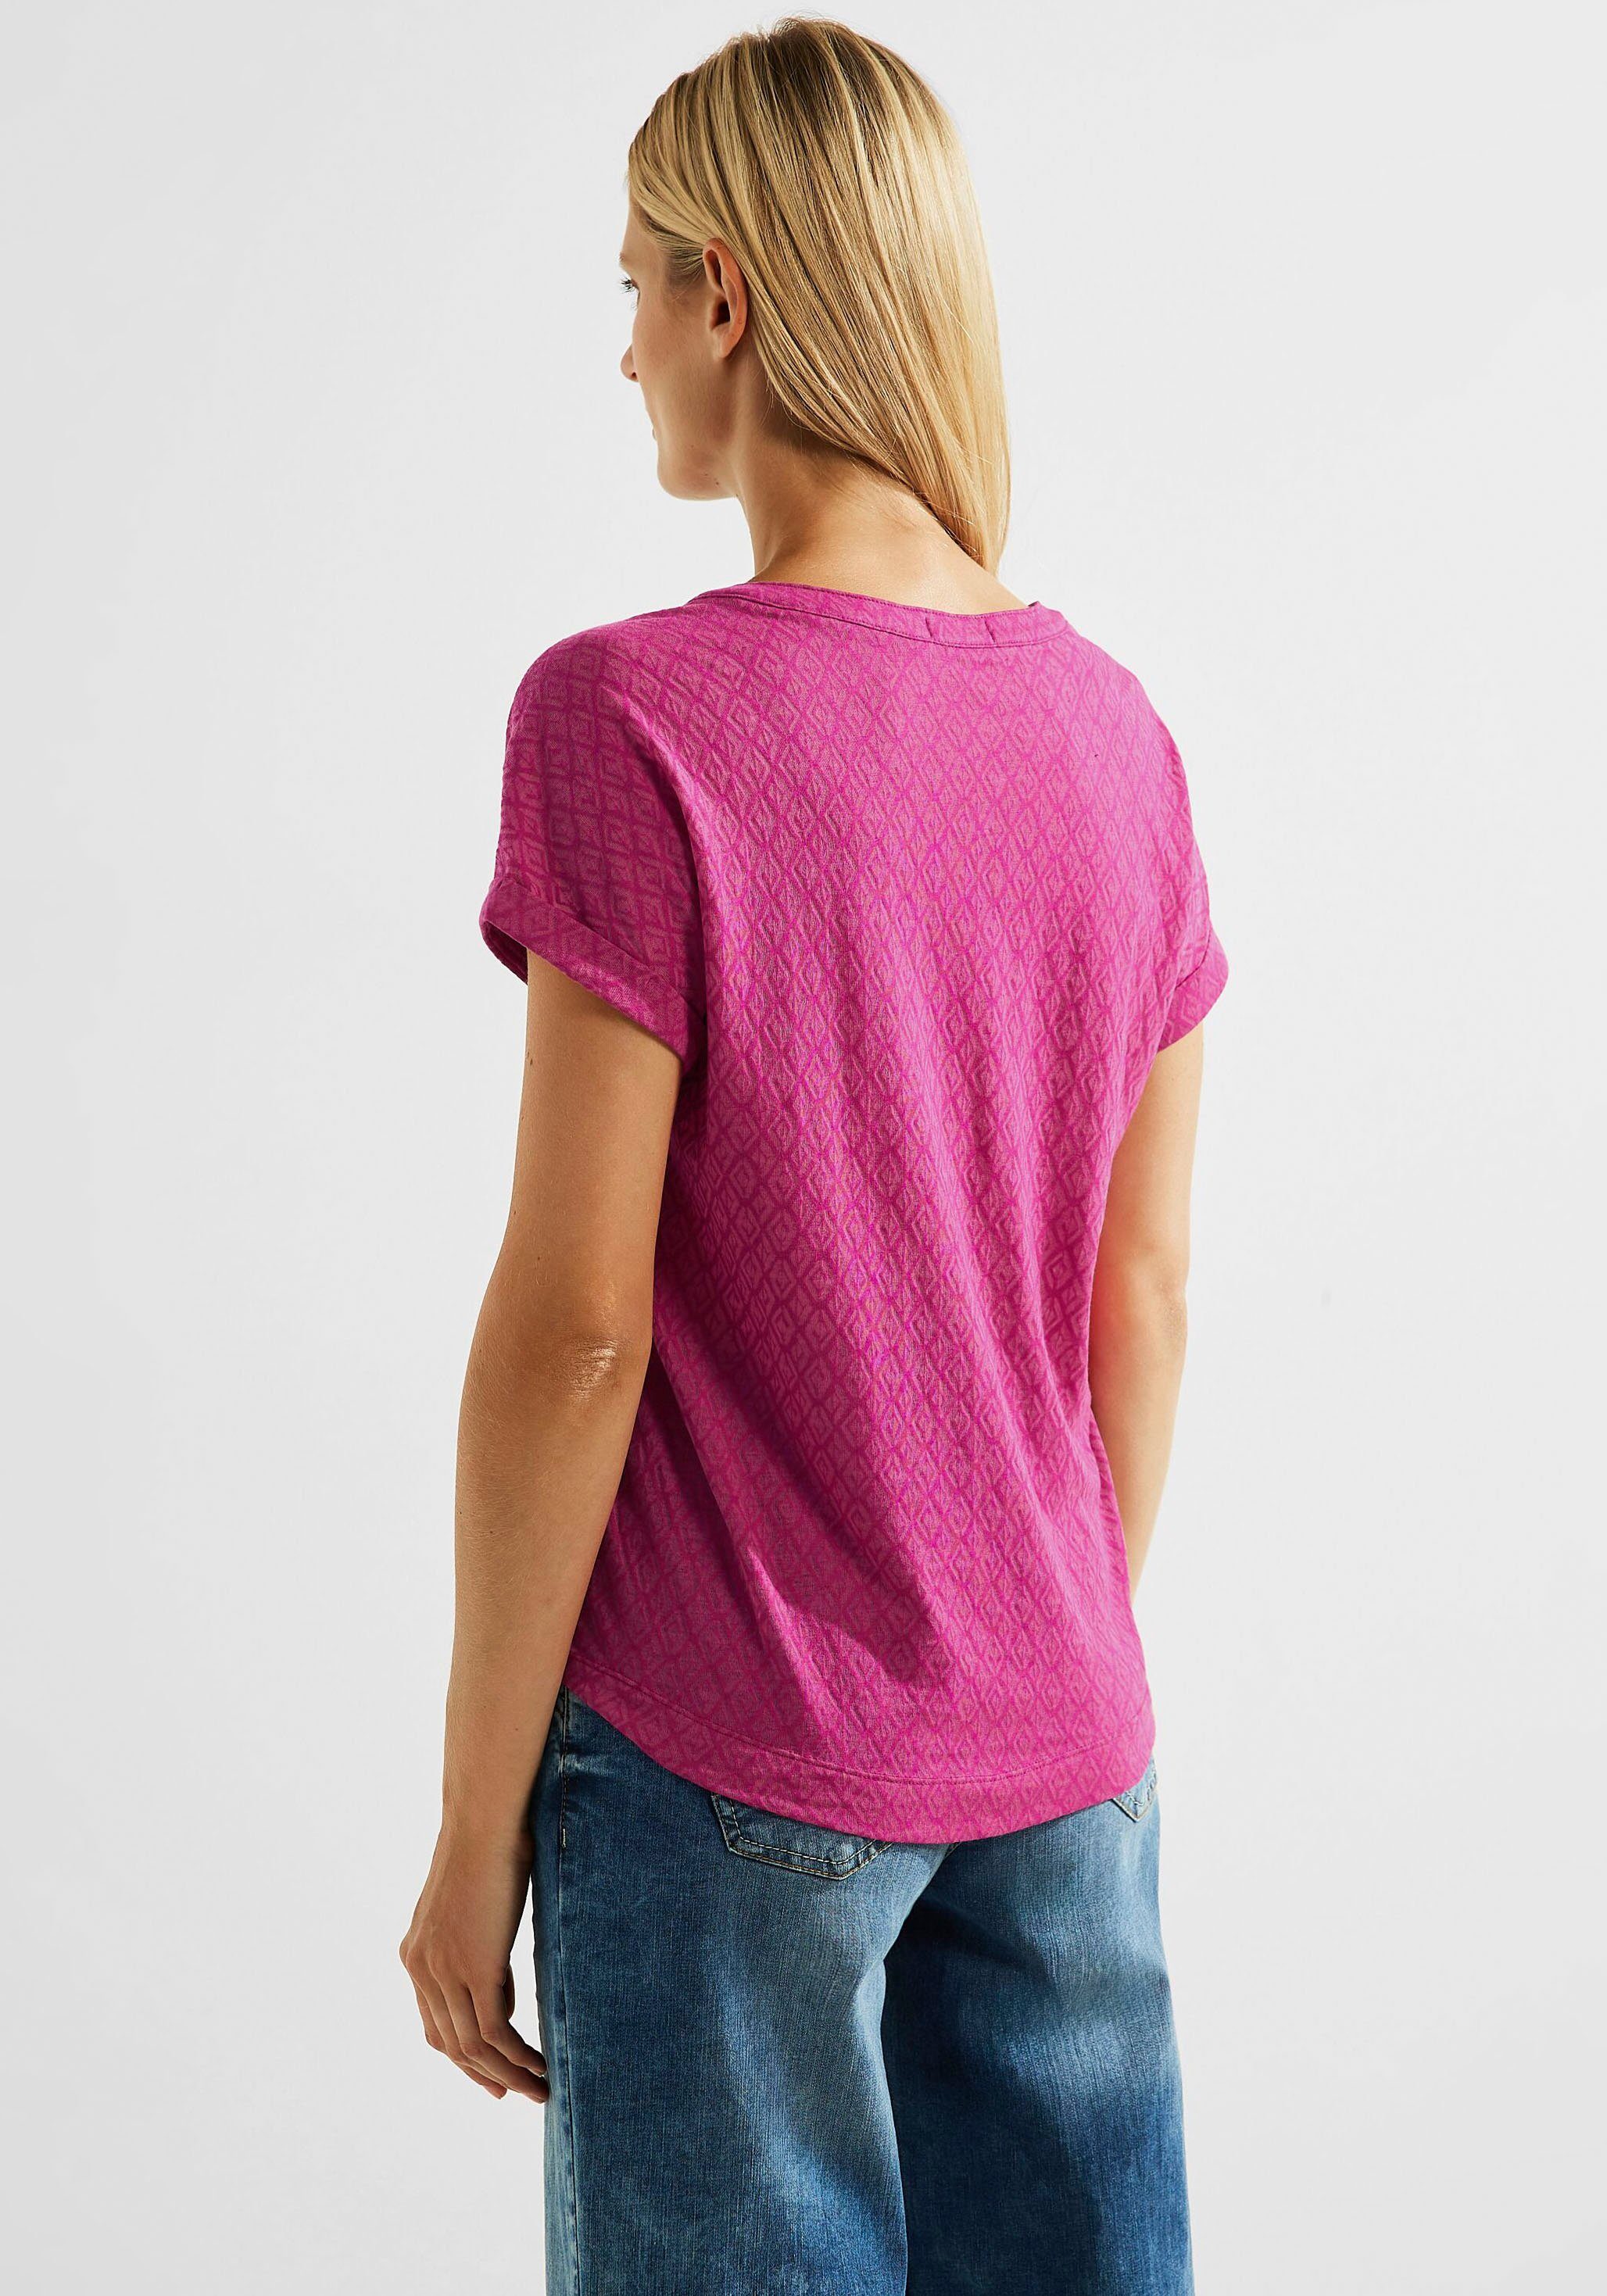 Allover-Muster pink Rhombusform T-Shirt mit in cool Cecil